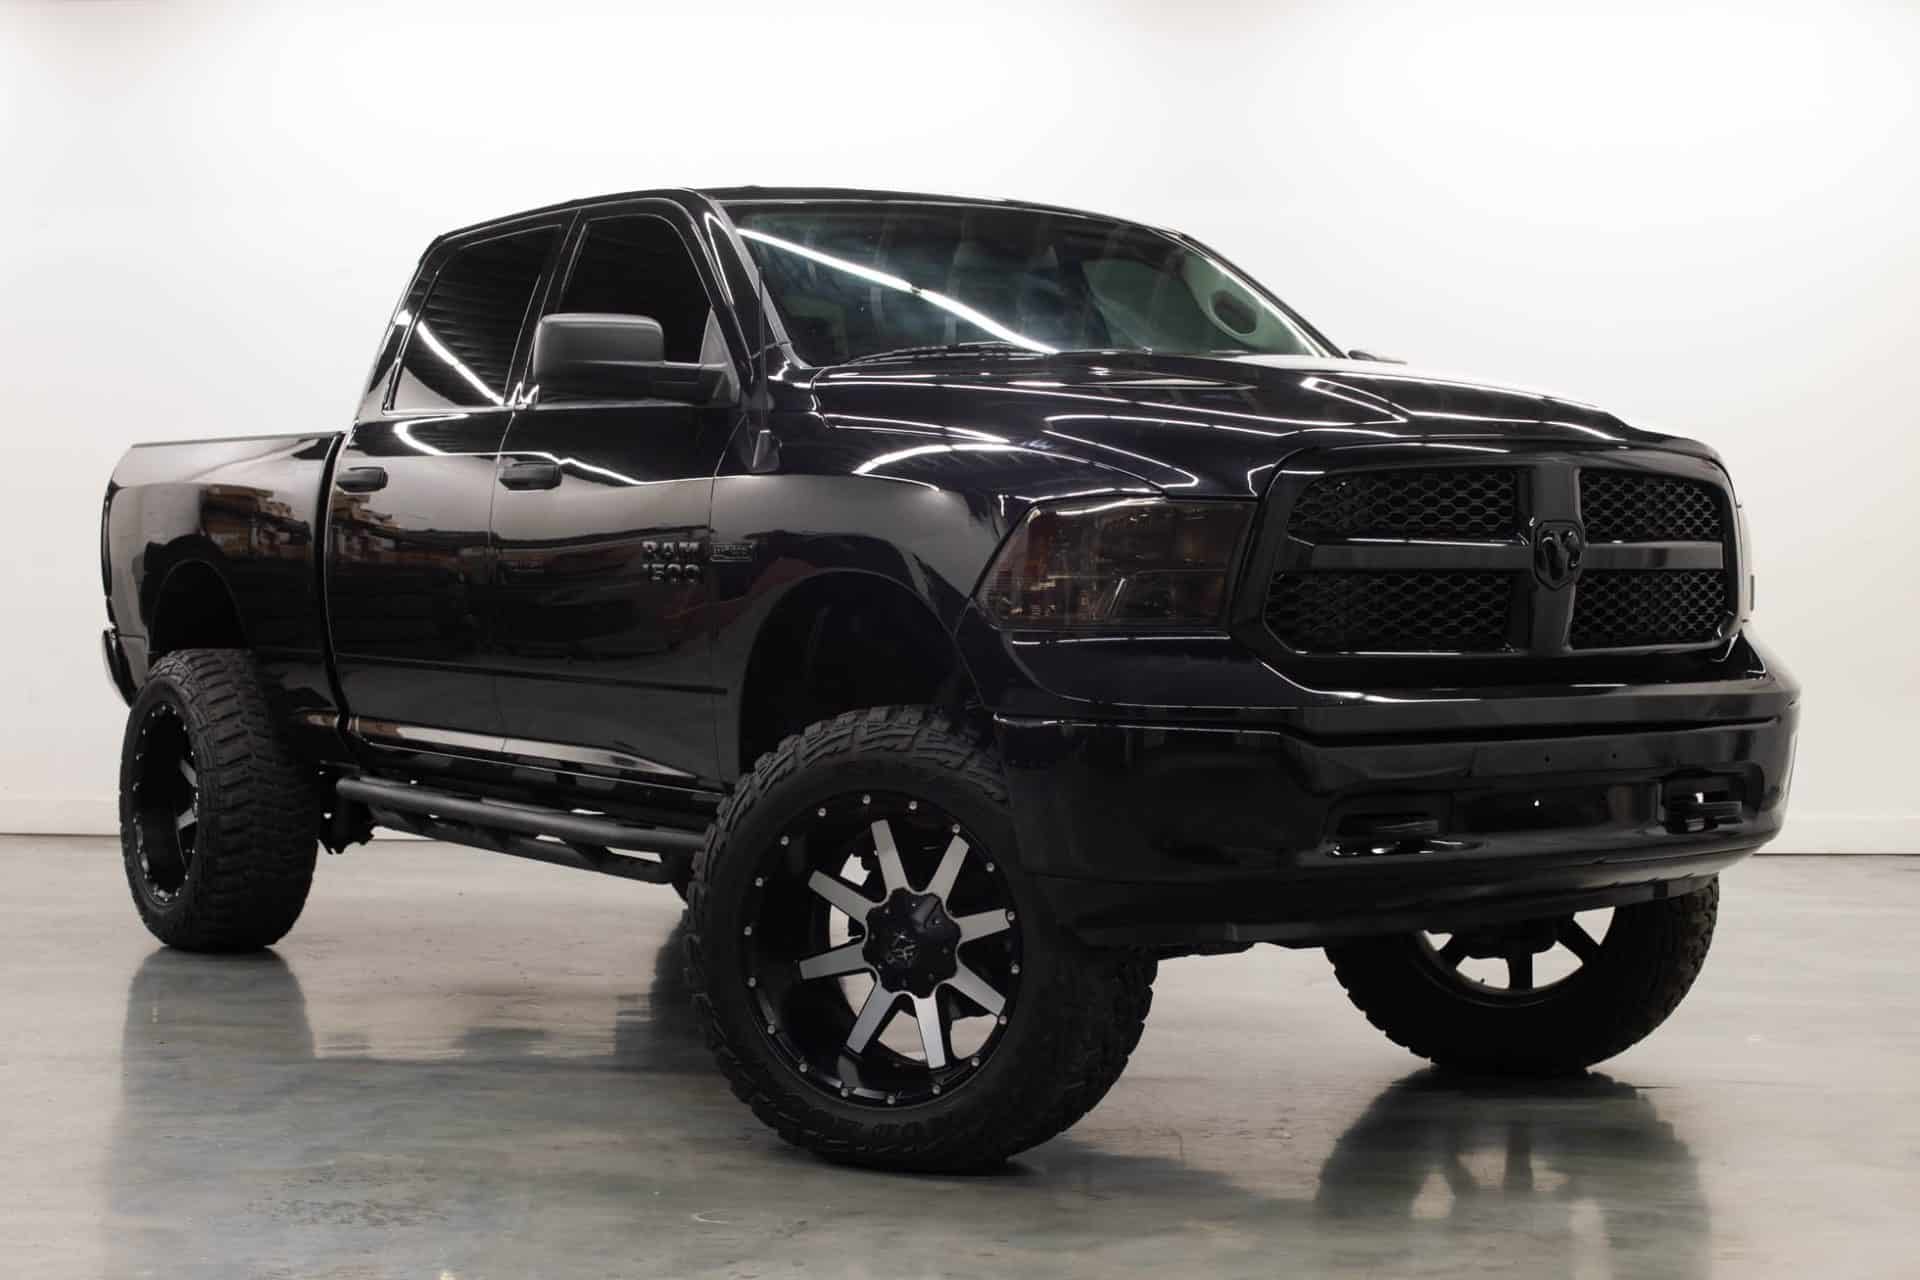 Where to Buy Lifted Trucks